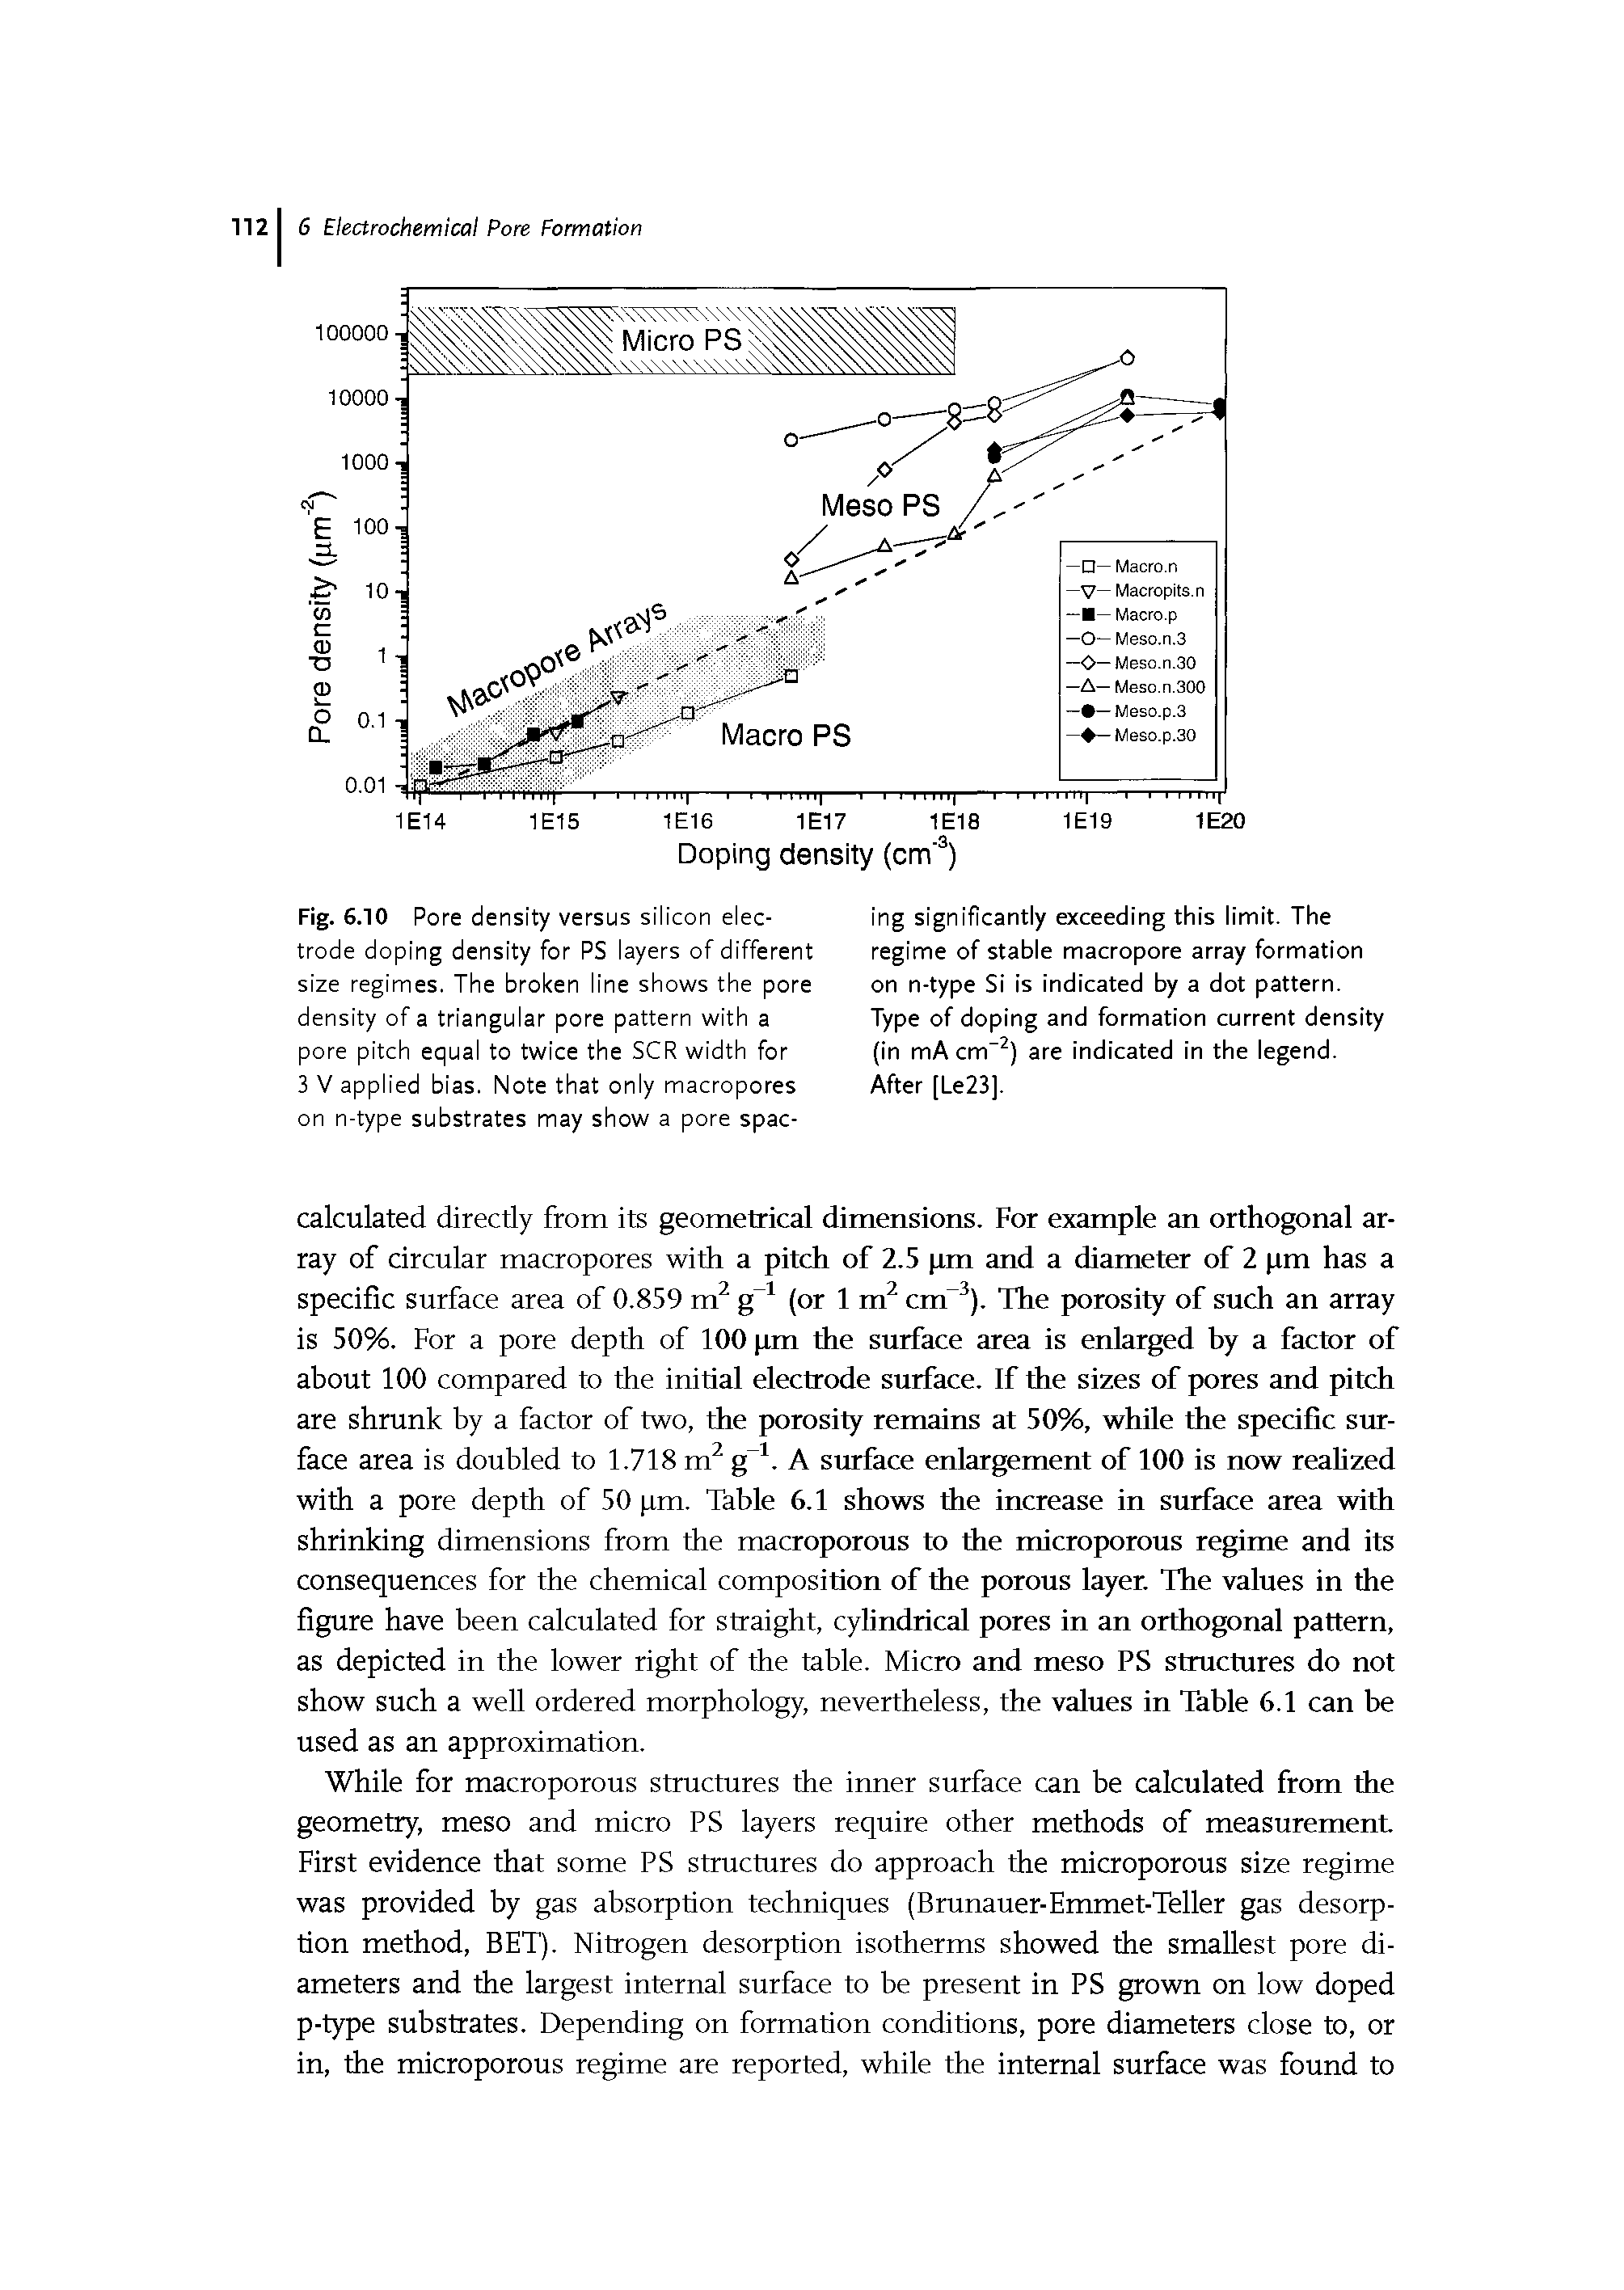 Fig. 6.10 Pore density versus silicon electrode doping density for PS layers of different size regimes. The broken line shows the pore density of a triangular pore pattern with a pore pitch equal to twice the SCR width for 3 V applied bias. Note that only macropores on n-type substrates may show a pore spac-...